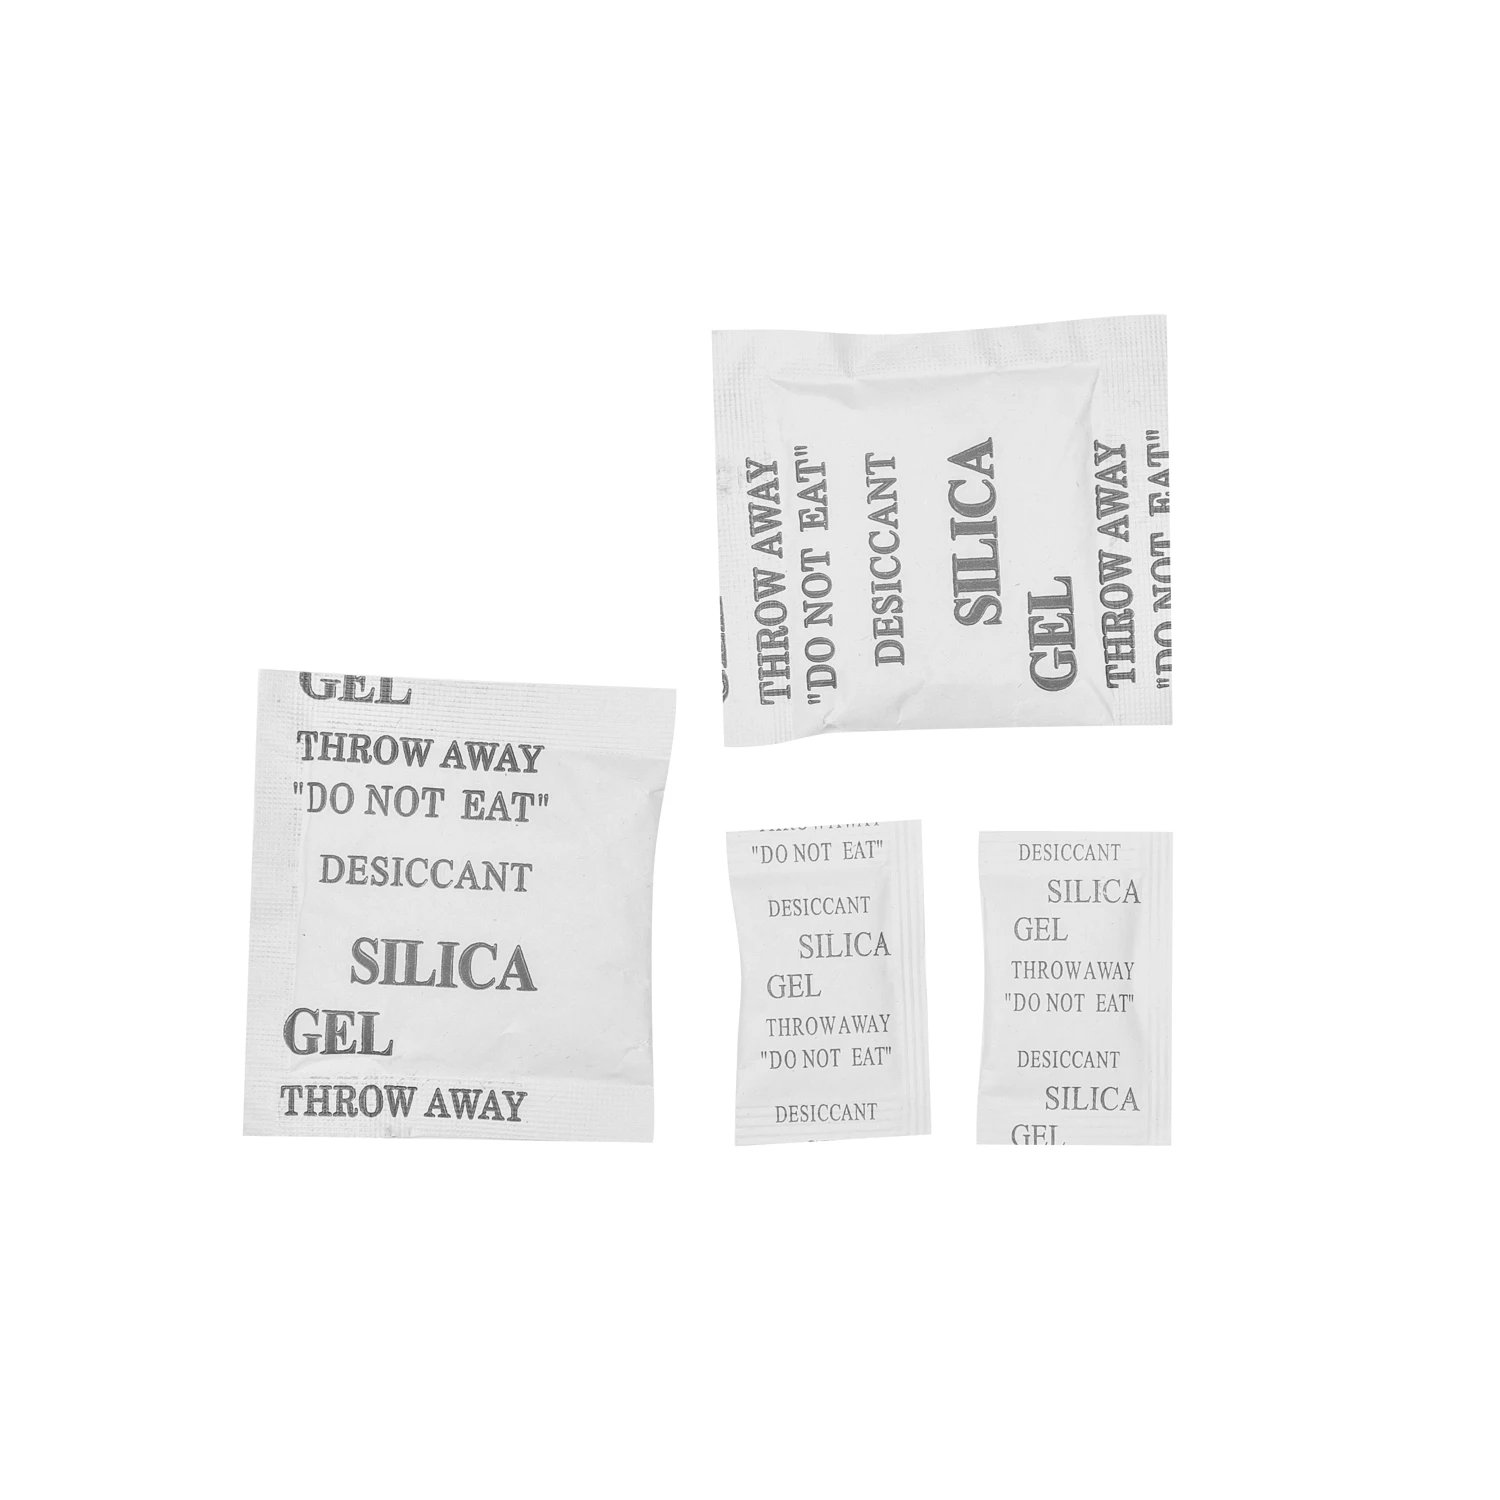 2g Desiccant gel white wrapped by composite paper silica gel packet